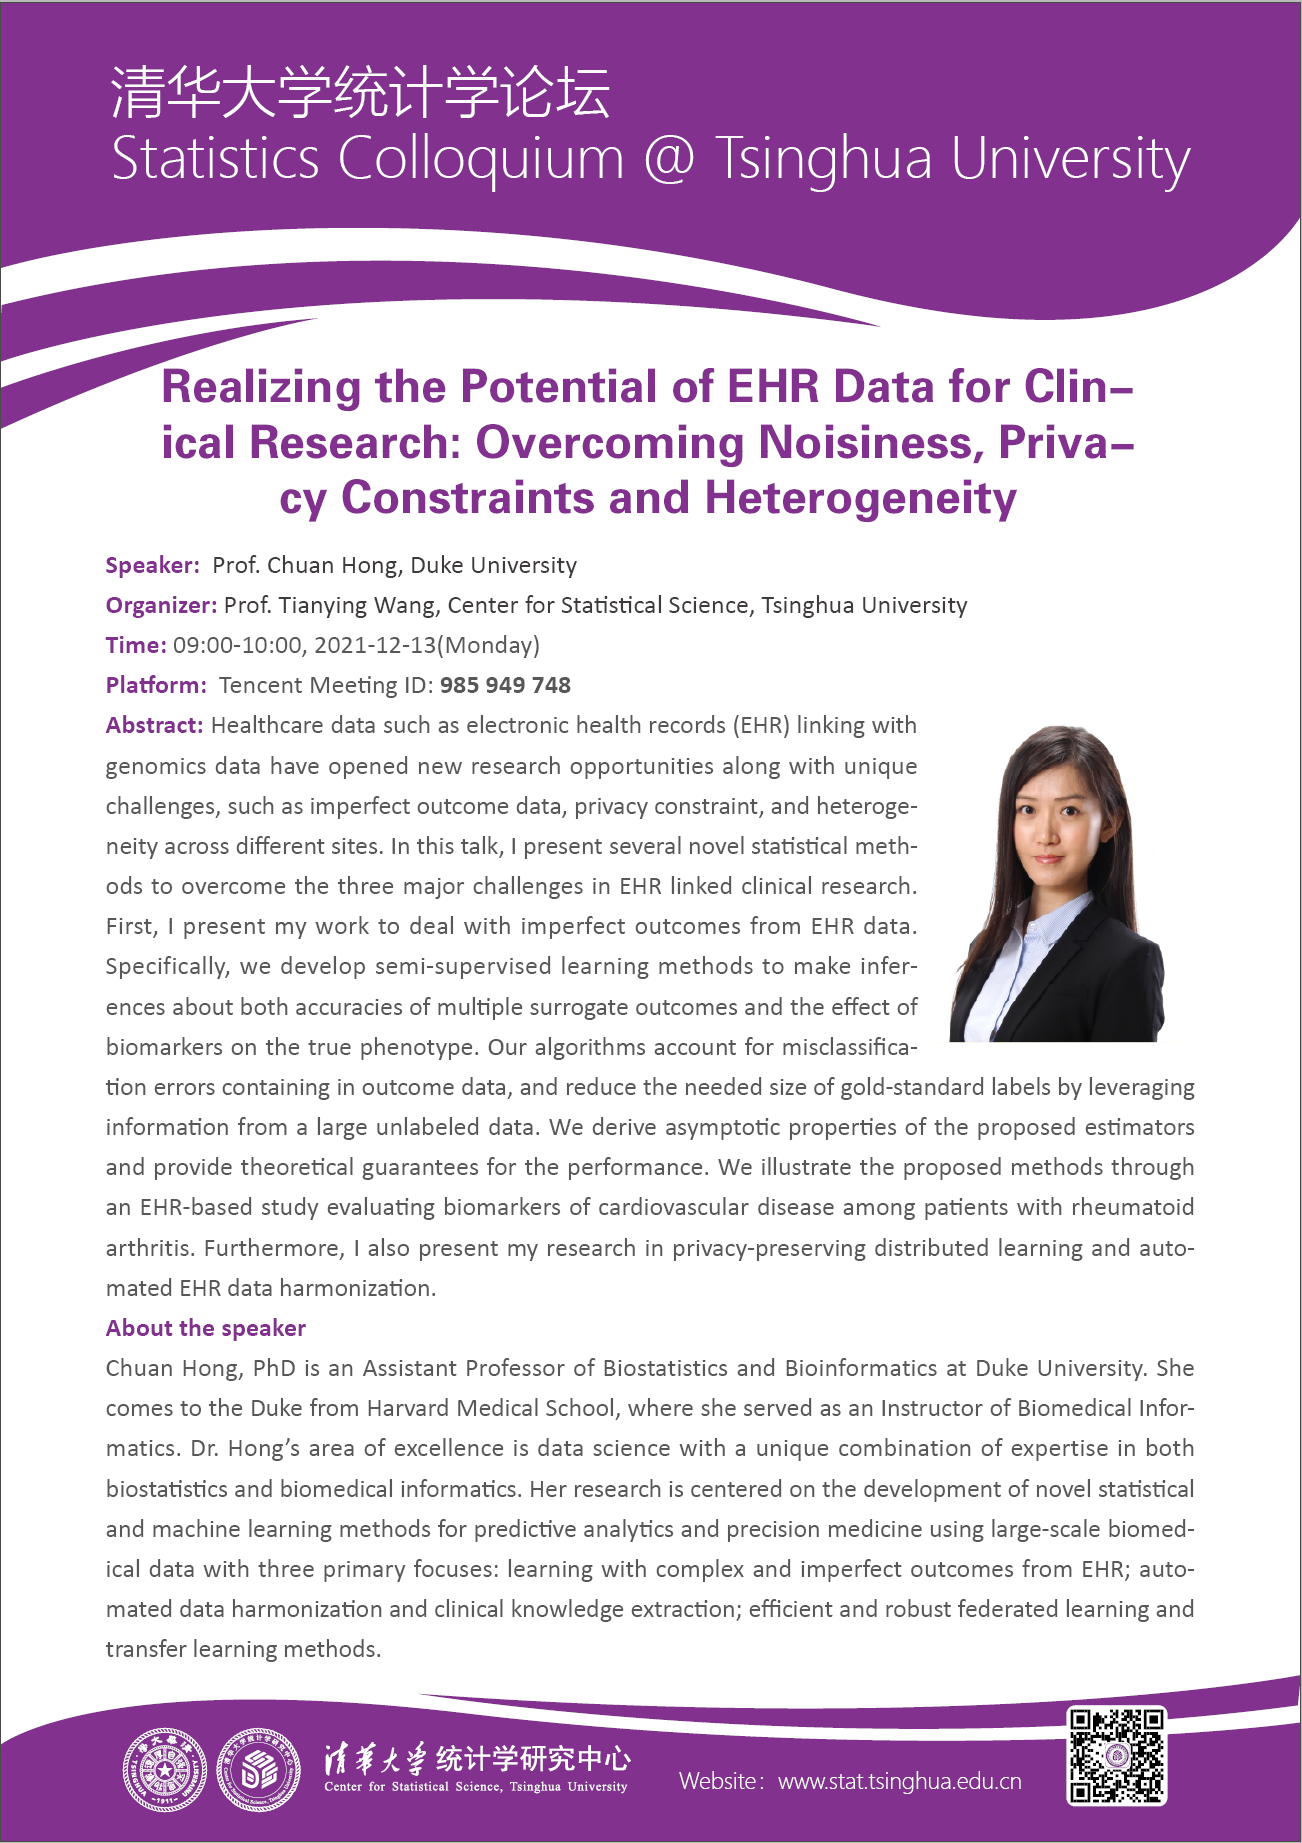 Realizing the Potential of EHR Data for Clinical Research: Overcoming Noisiness, Privacy Constraints and Heterogeneity